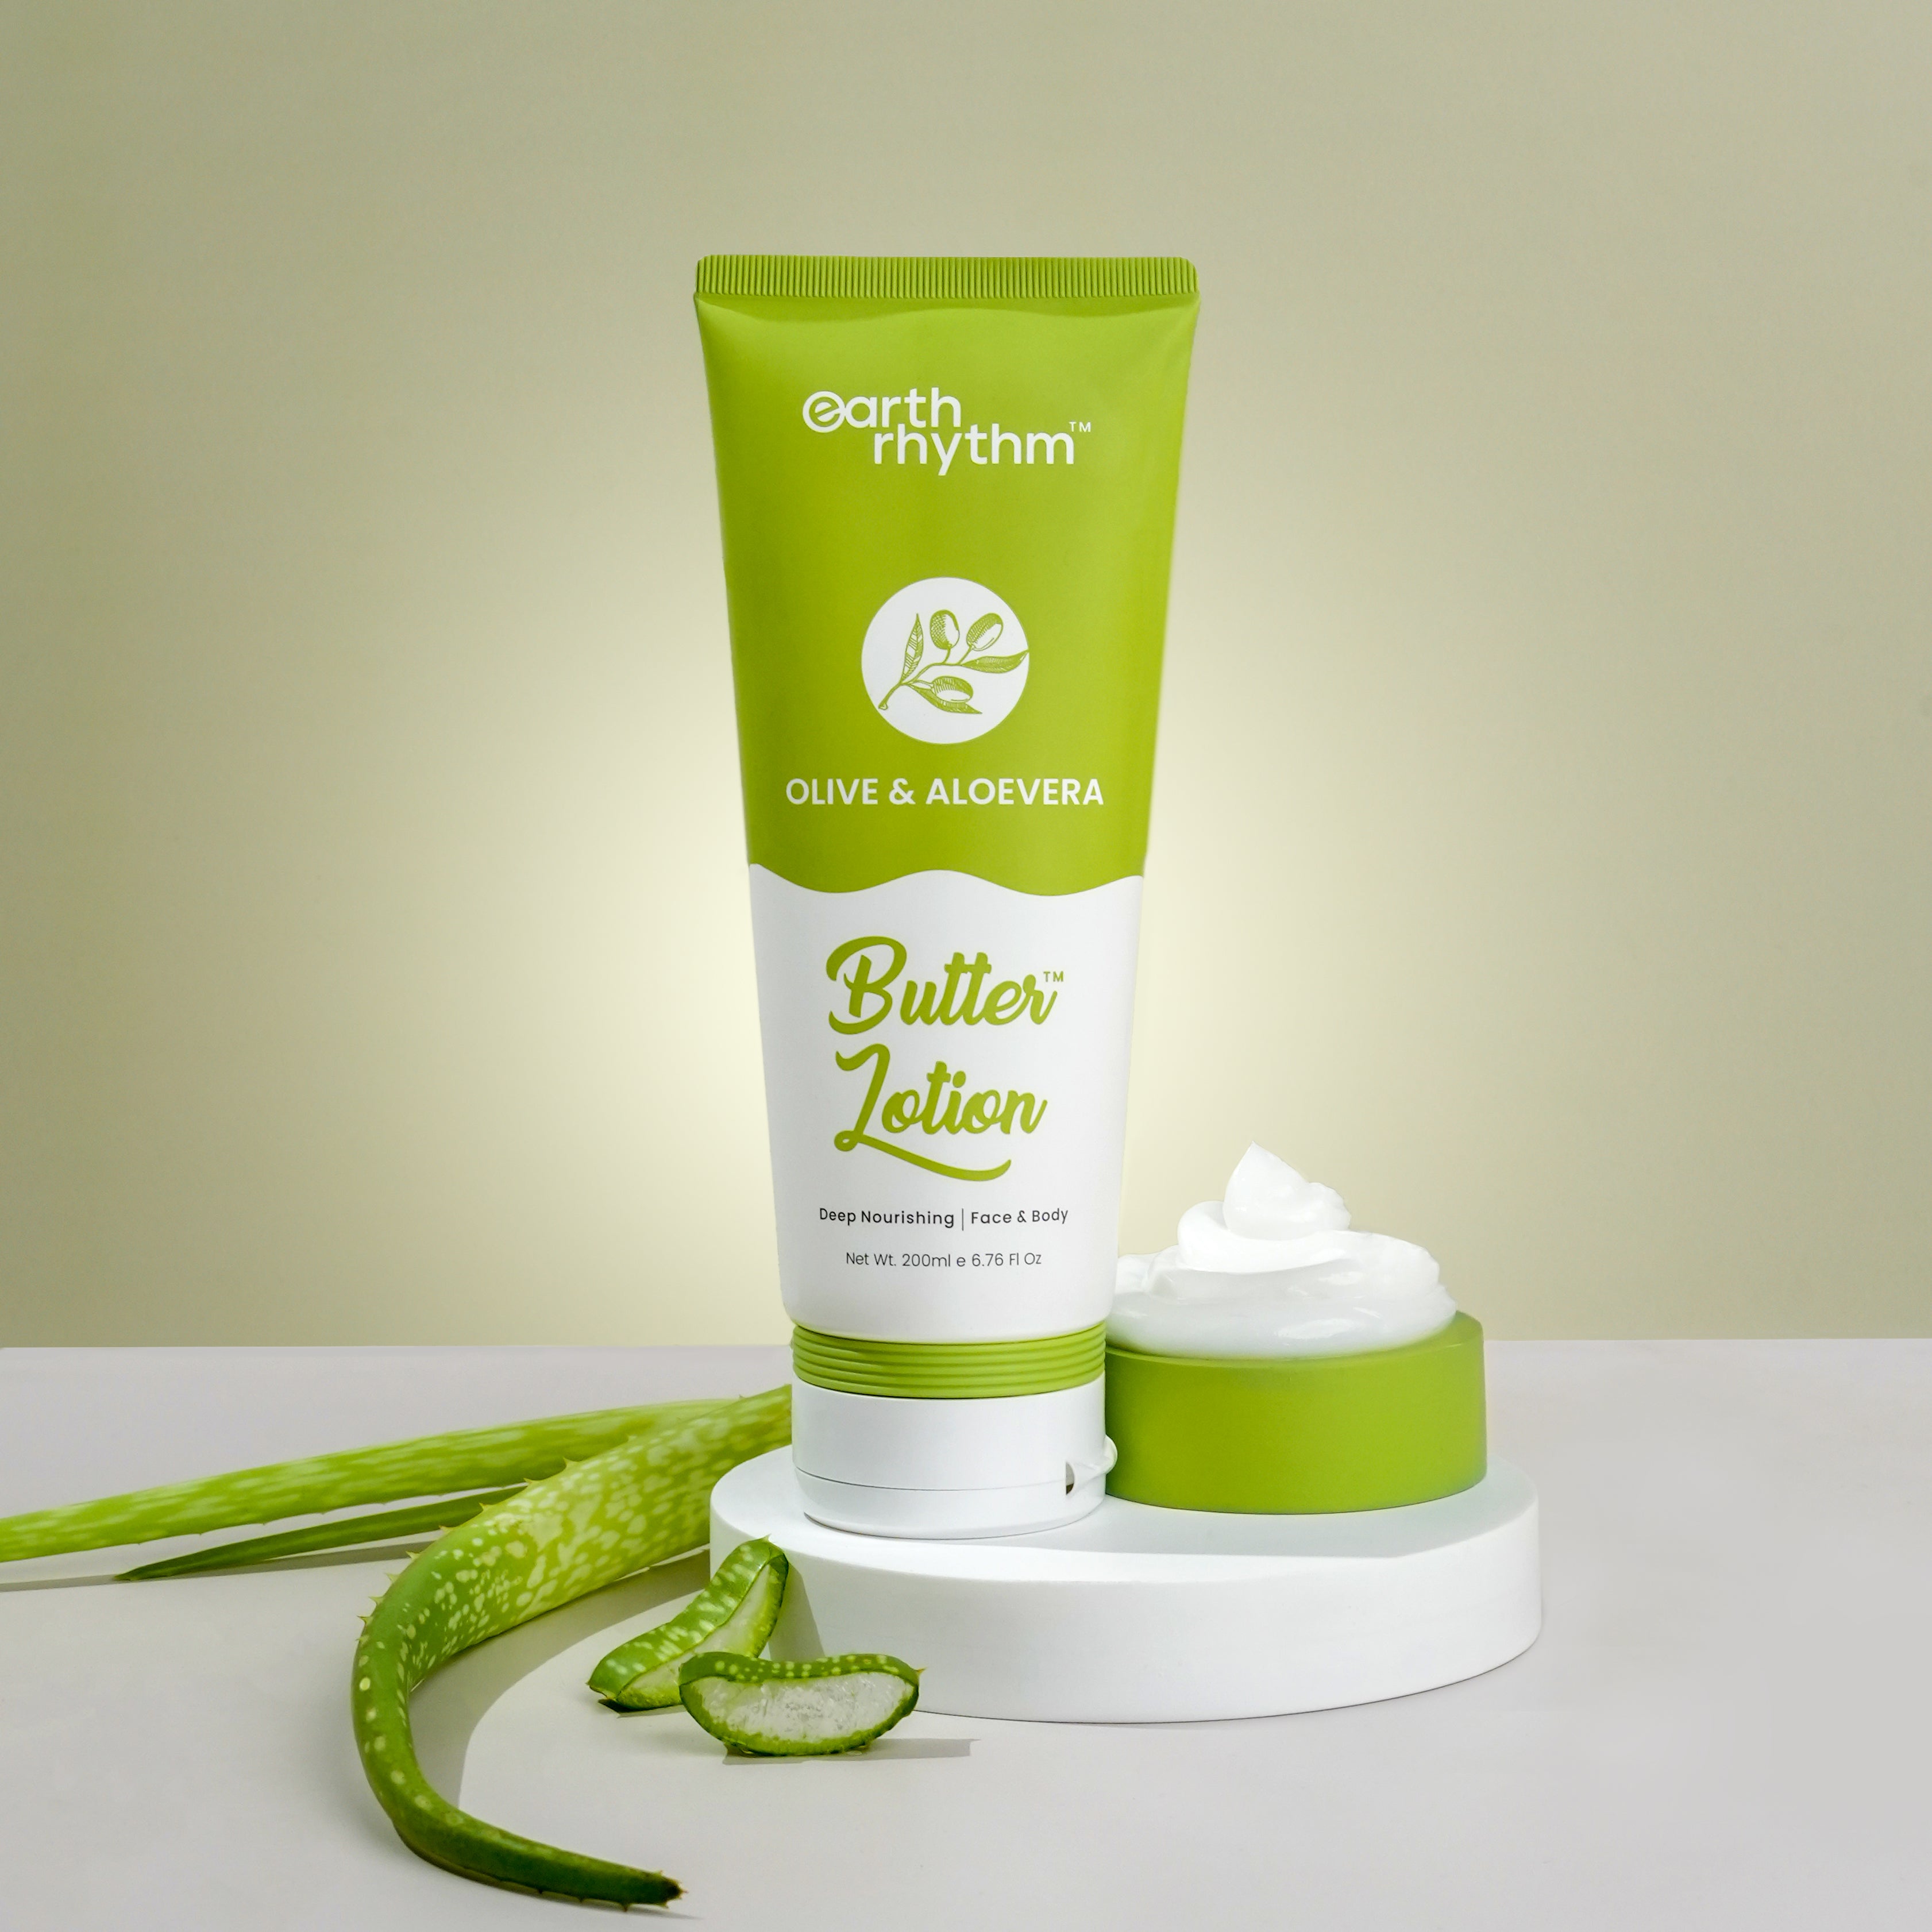 olive & aloevera butter lotion